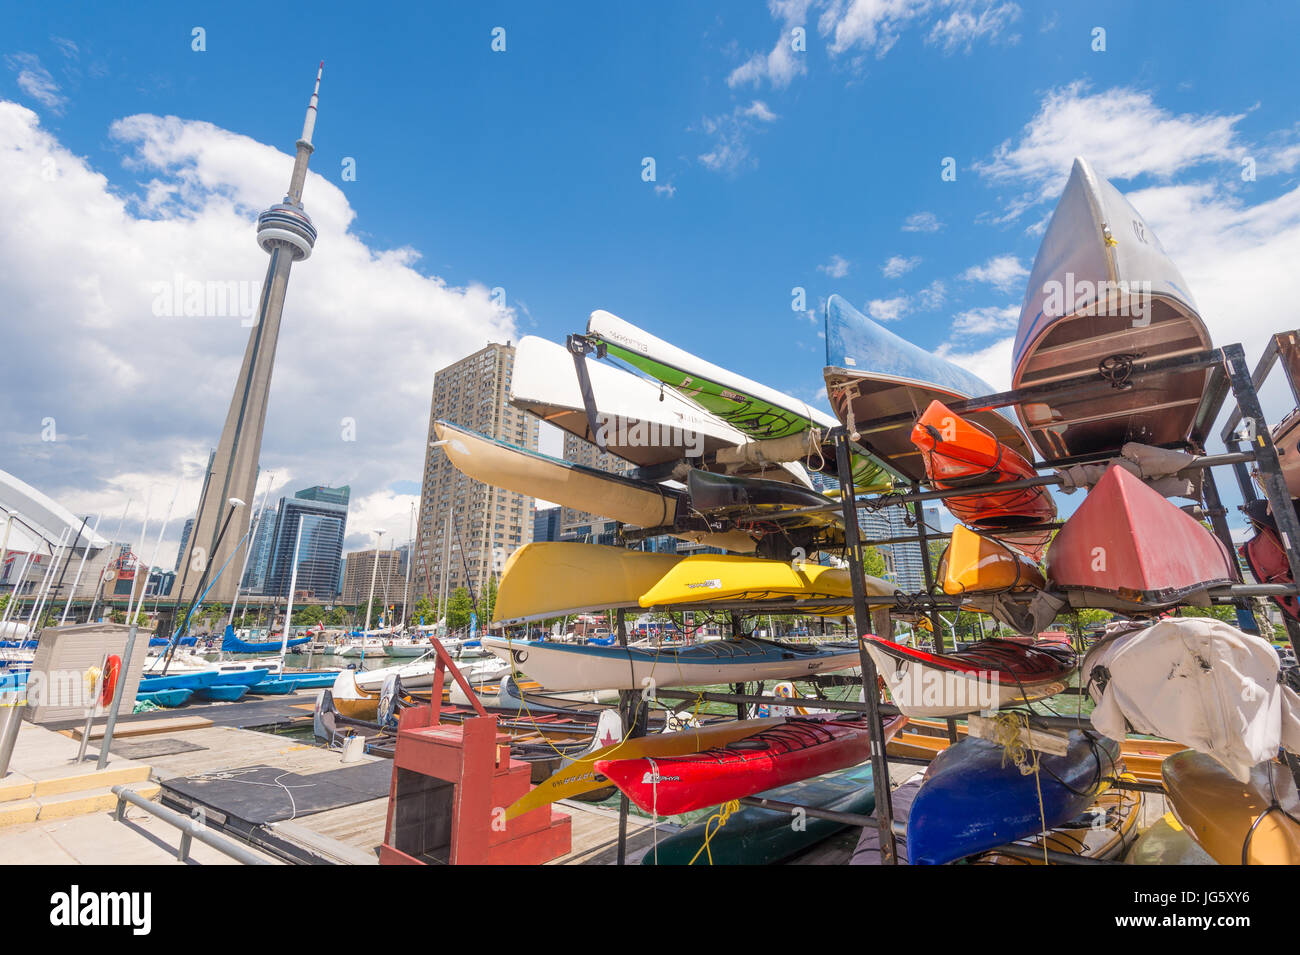 Toronto, Canada - 26 June 2017: Racks of brightly colored kayaks and canoes at Toronto waterfront in summer, with CN Tower in the background Stock Photo